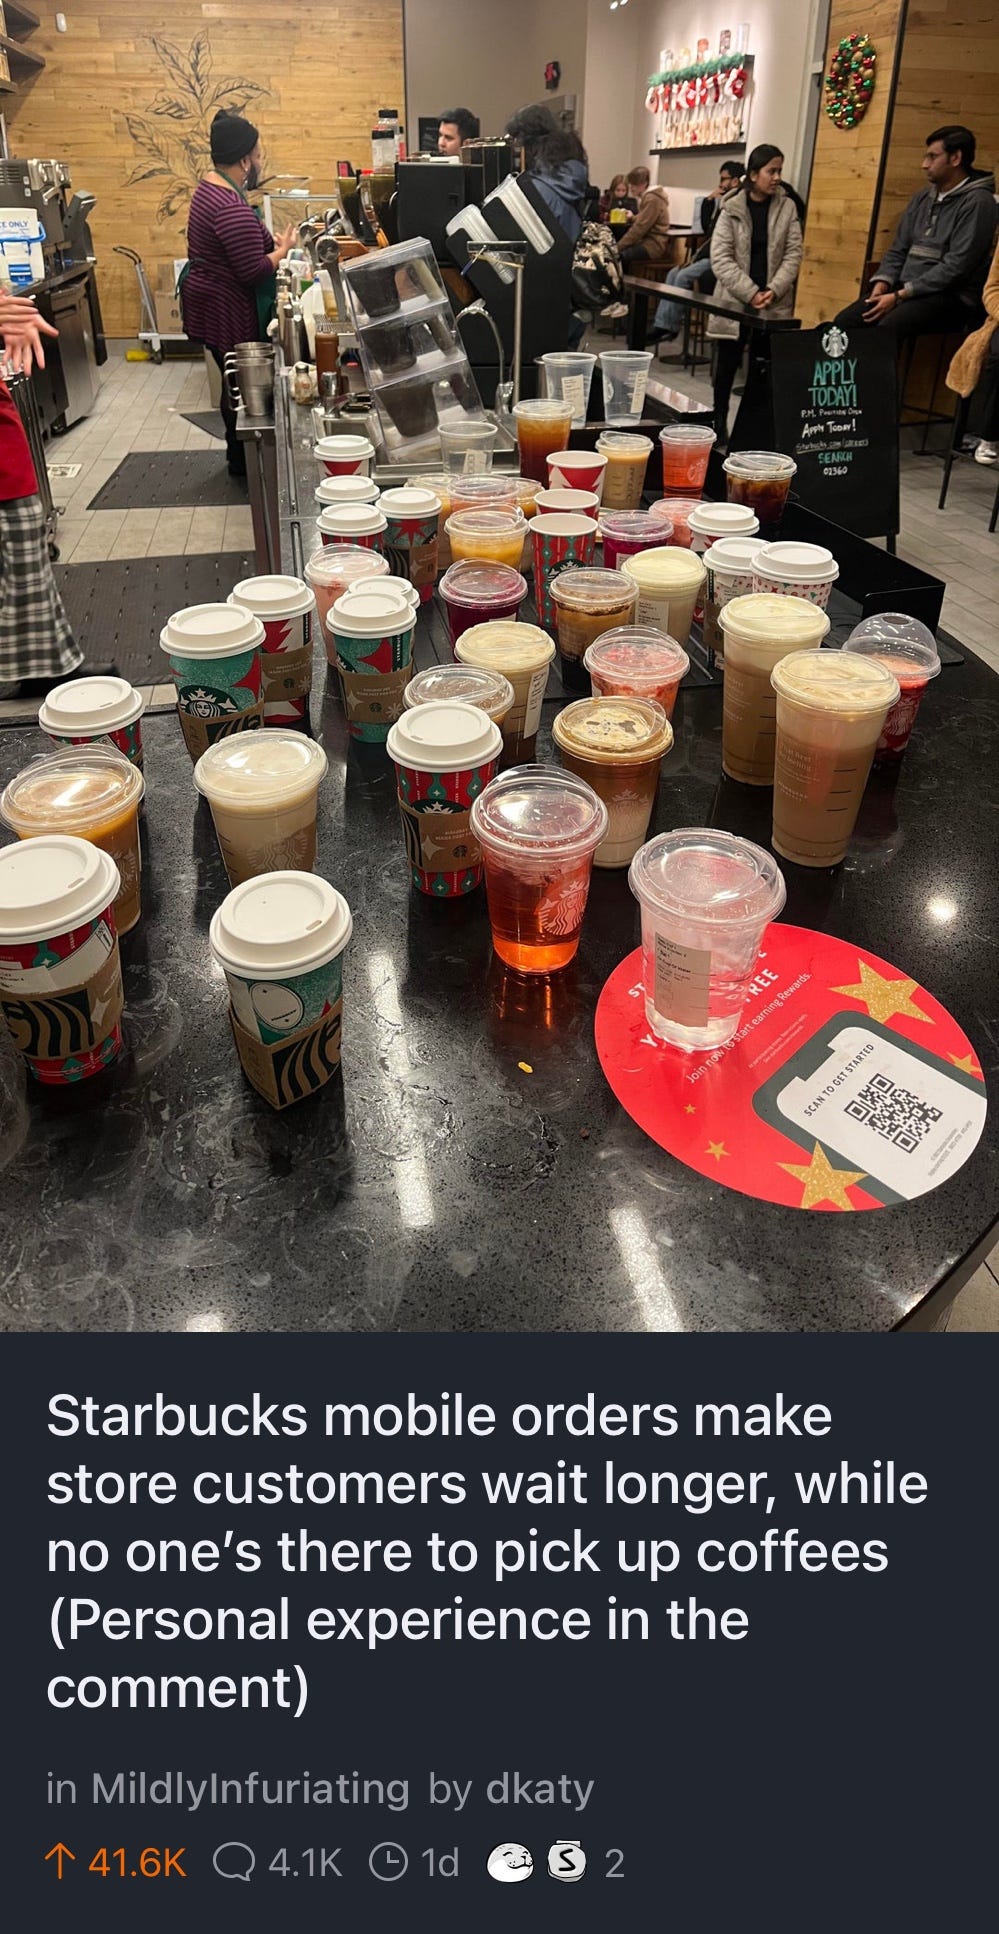 Starbucks mobile orders make store customers wait longer, while no one's there to pick up coffees